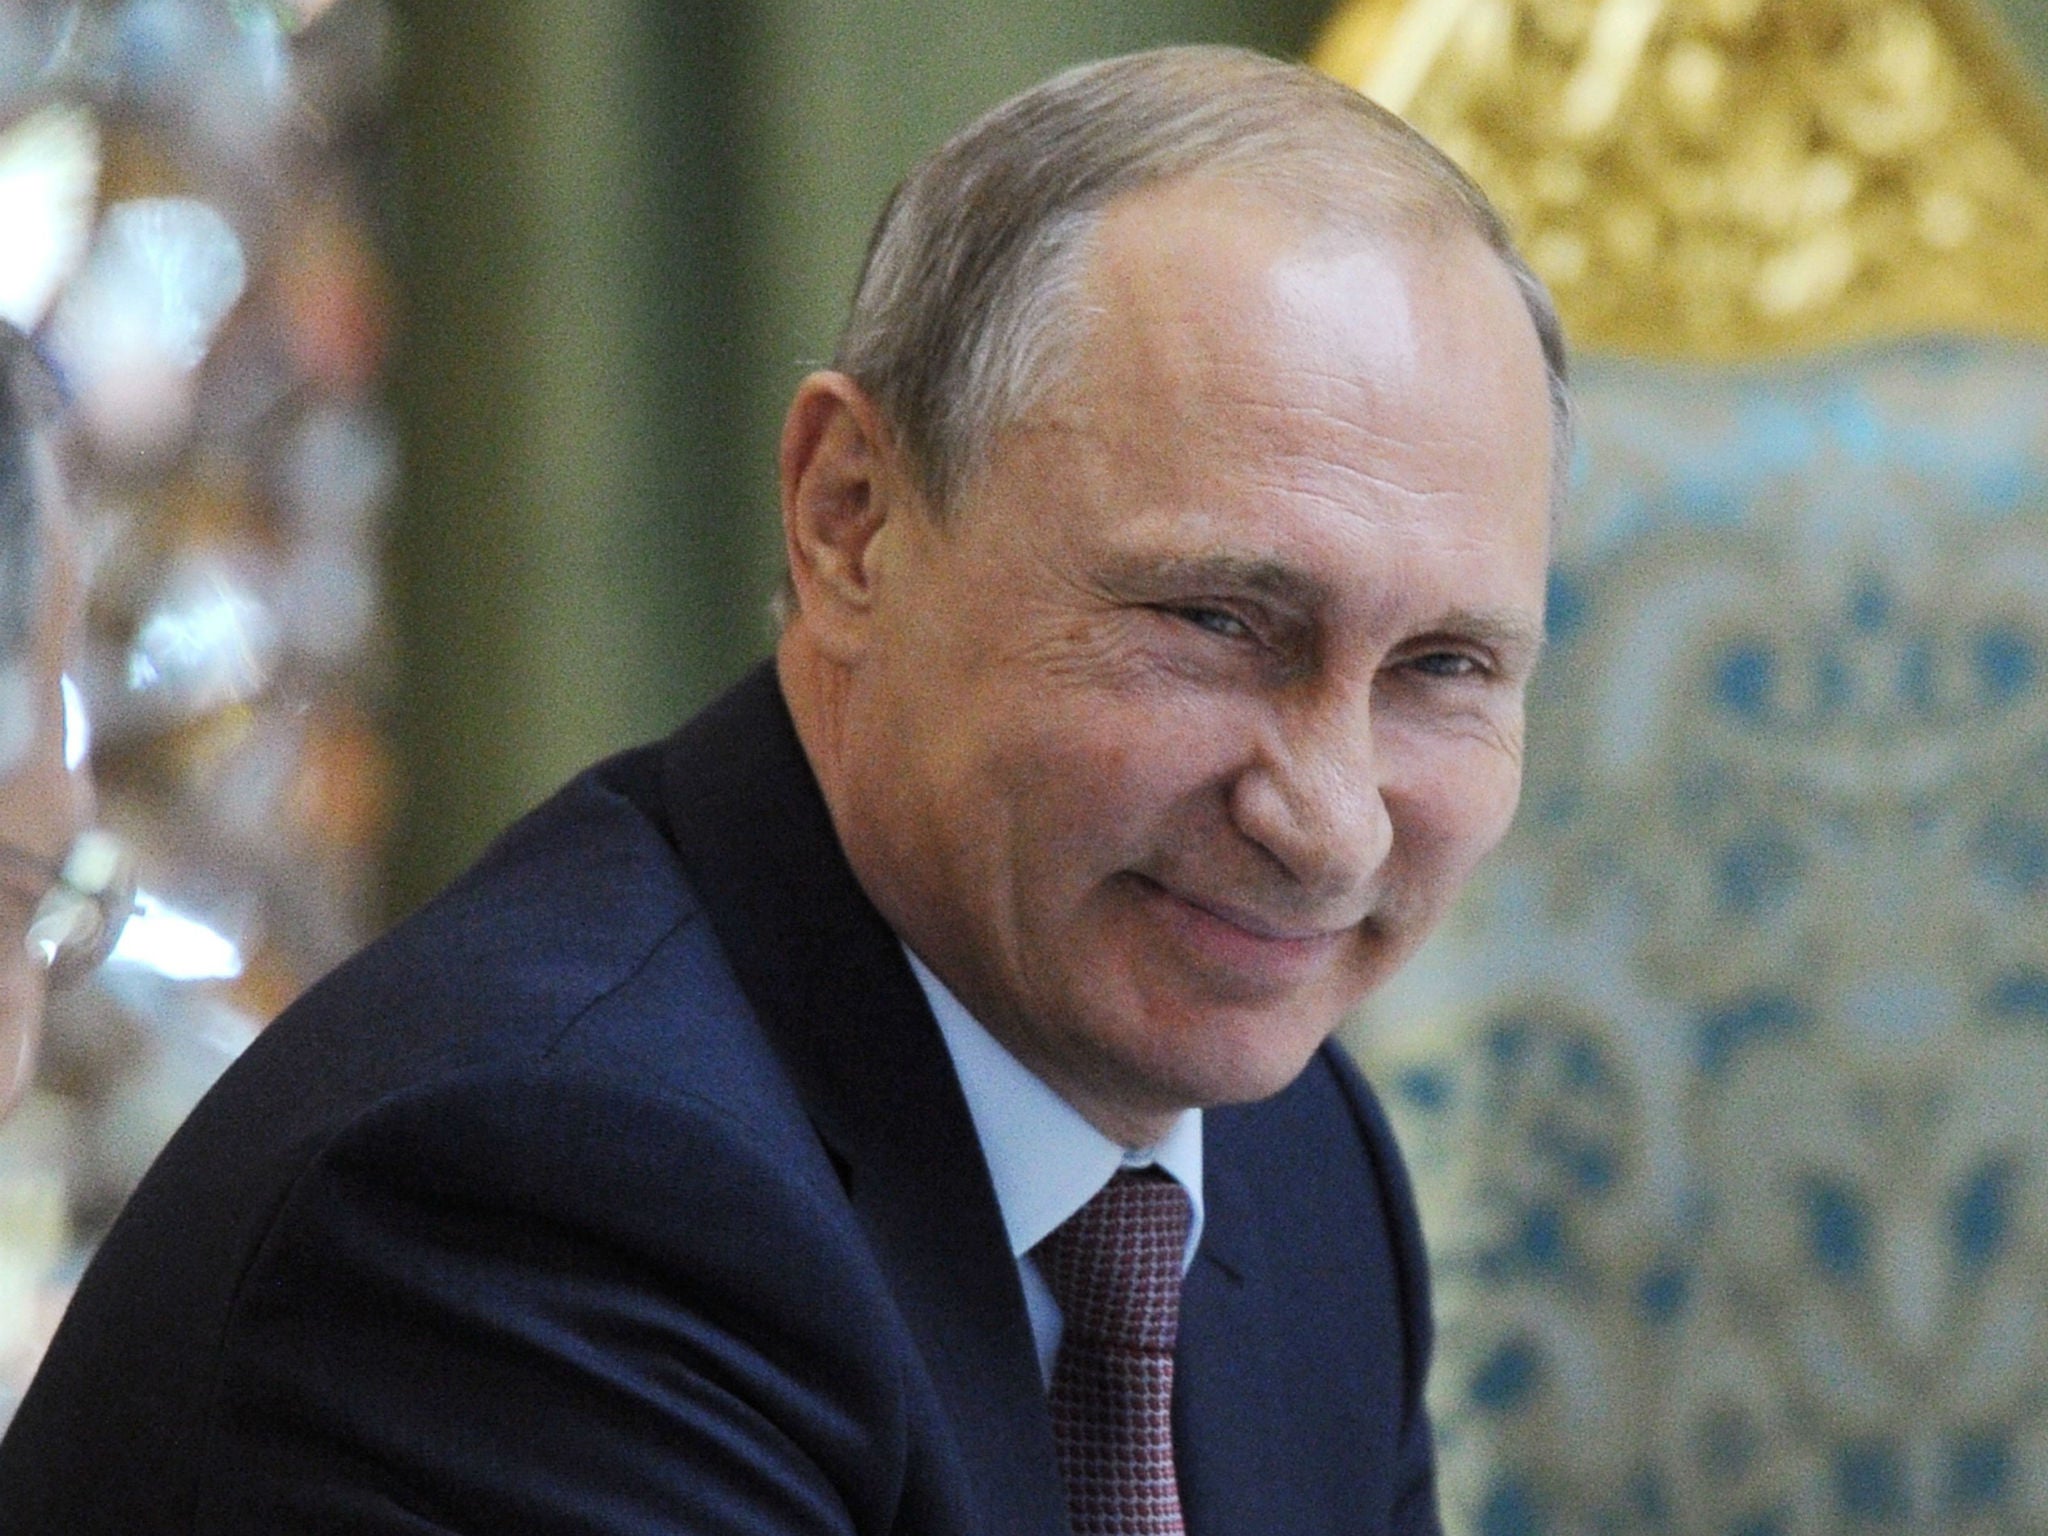 Vladimir Putin has been directly blamed for the assassination by a British inquiry